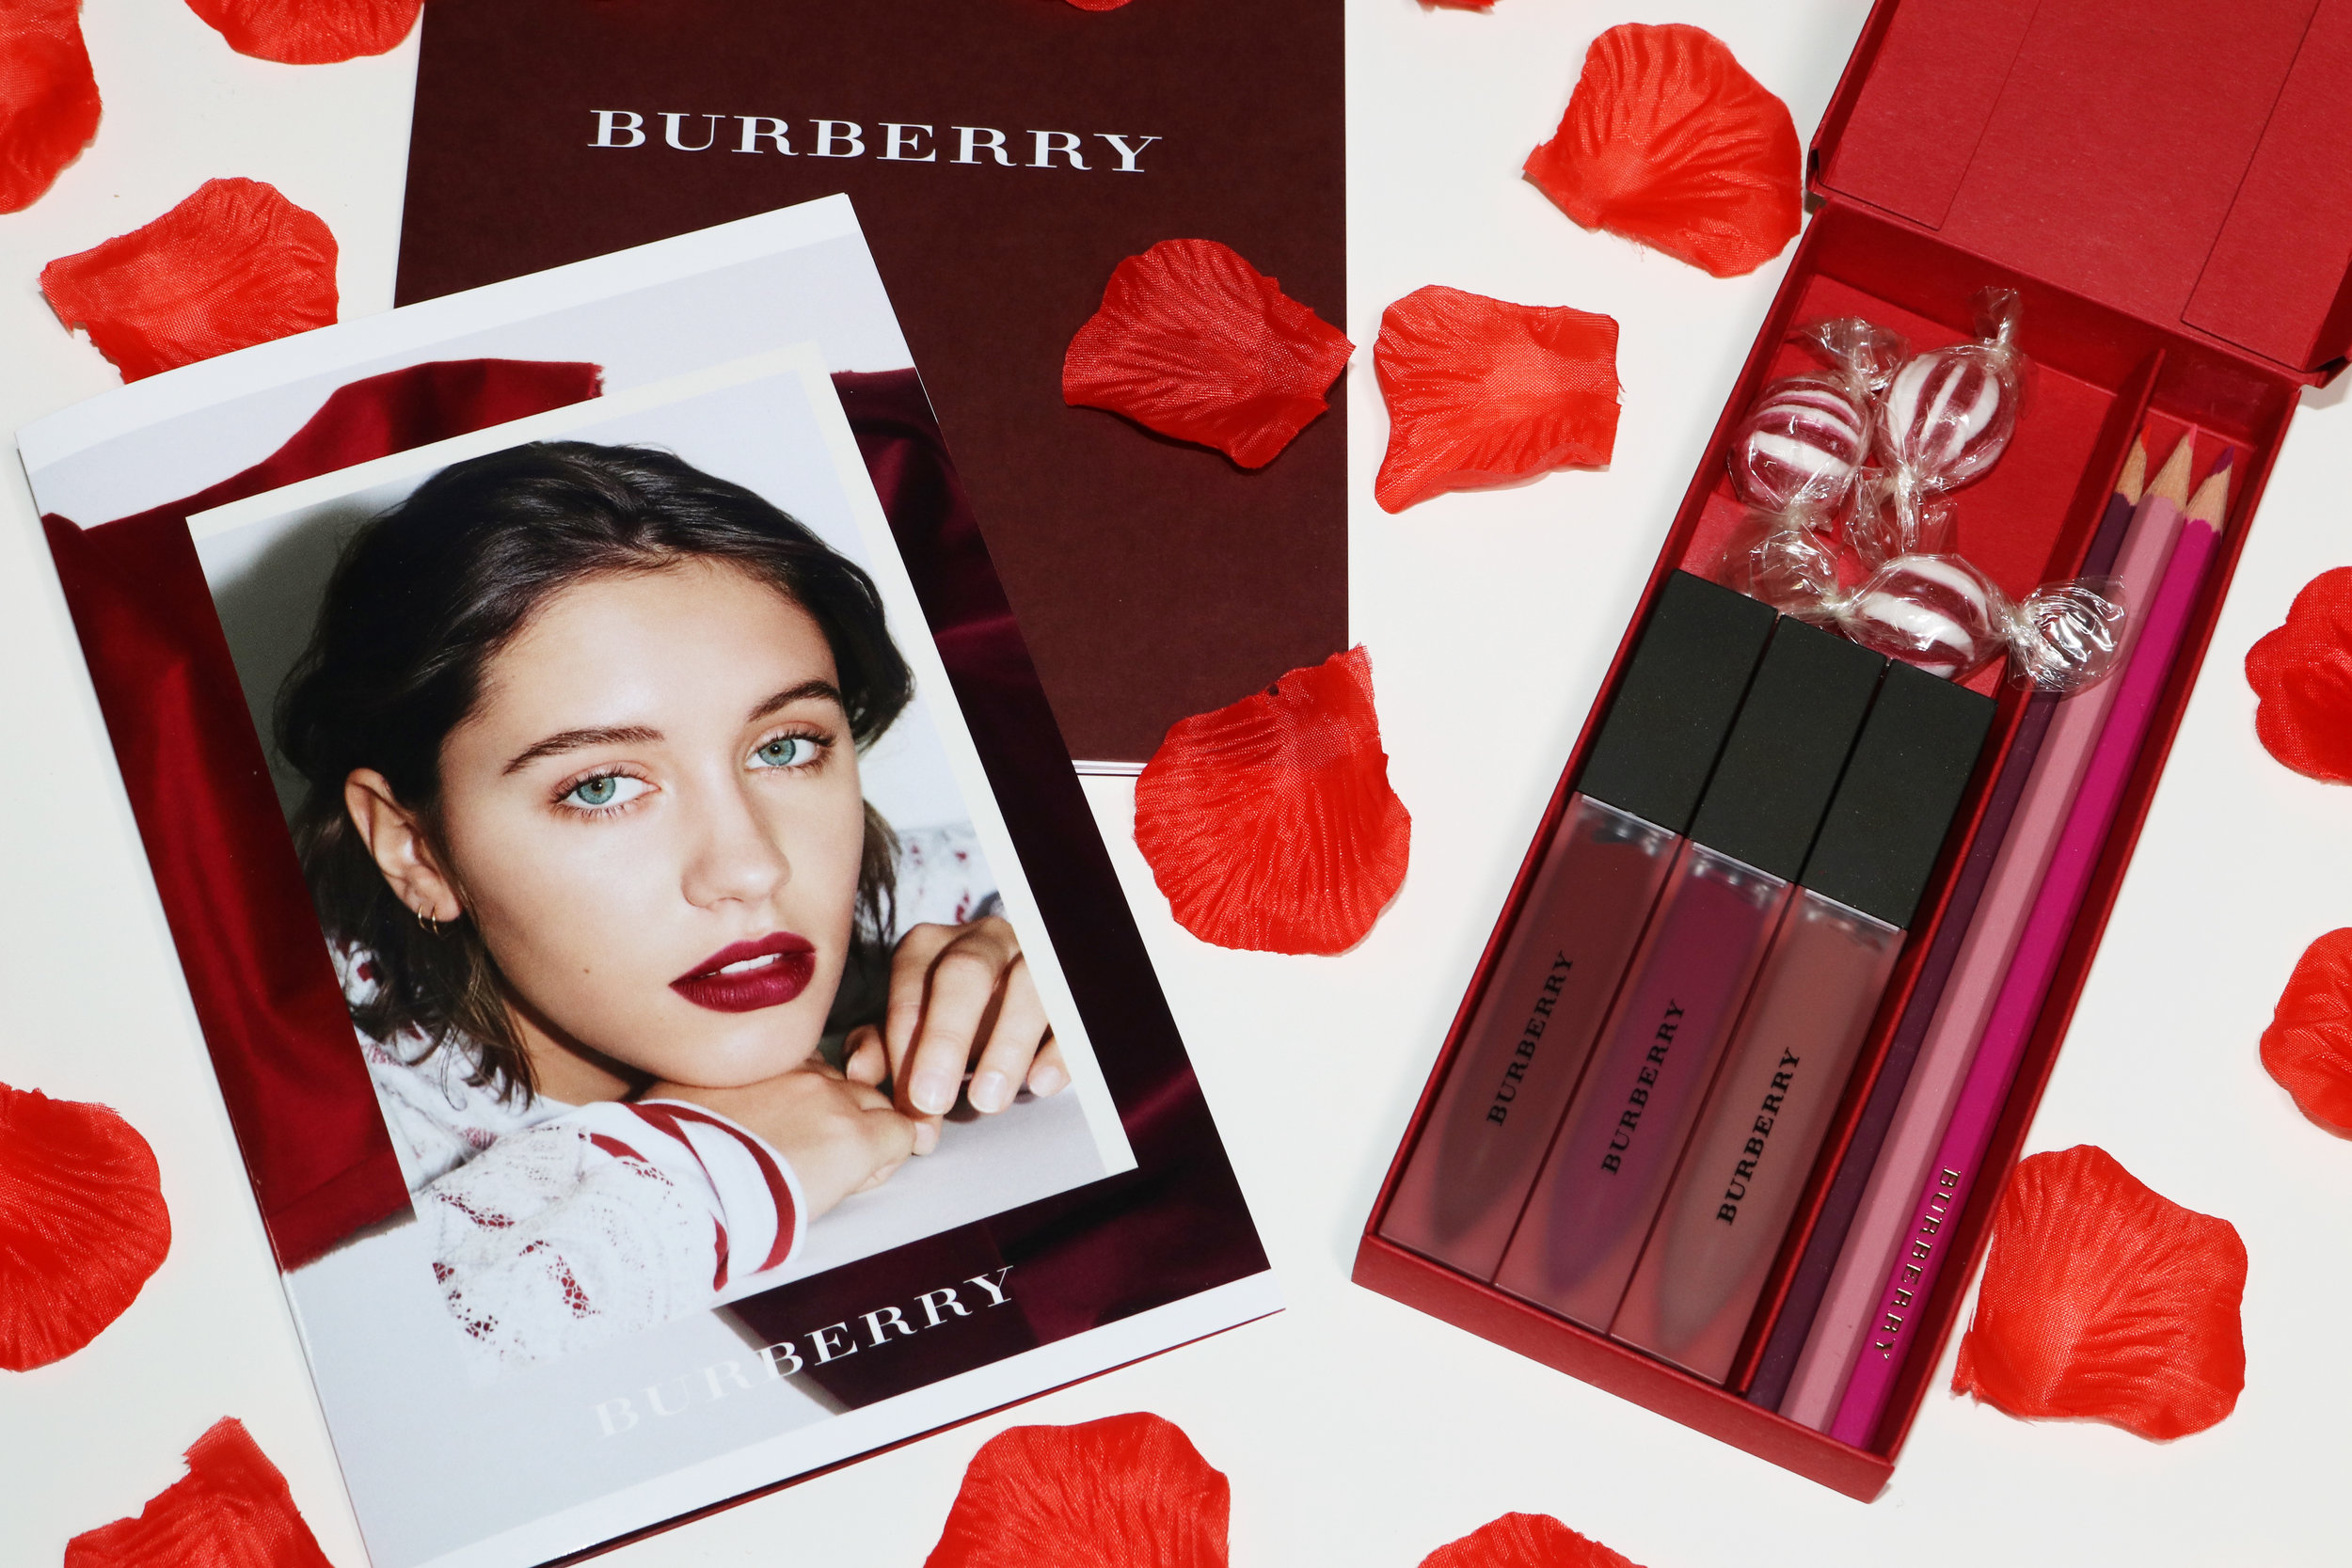 Burberry Liquid Lip Velvets in Fawn, Bright Plum and Oxblood – Review,  Photos & Swatches — Candy Coated Closets